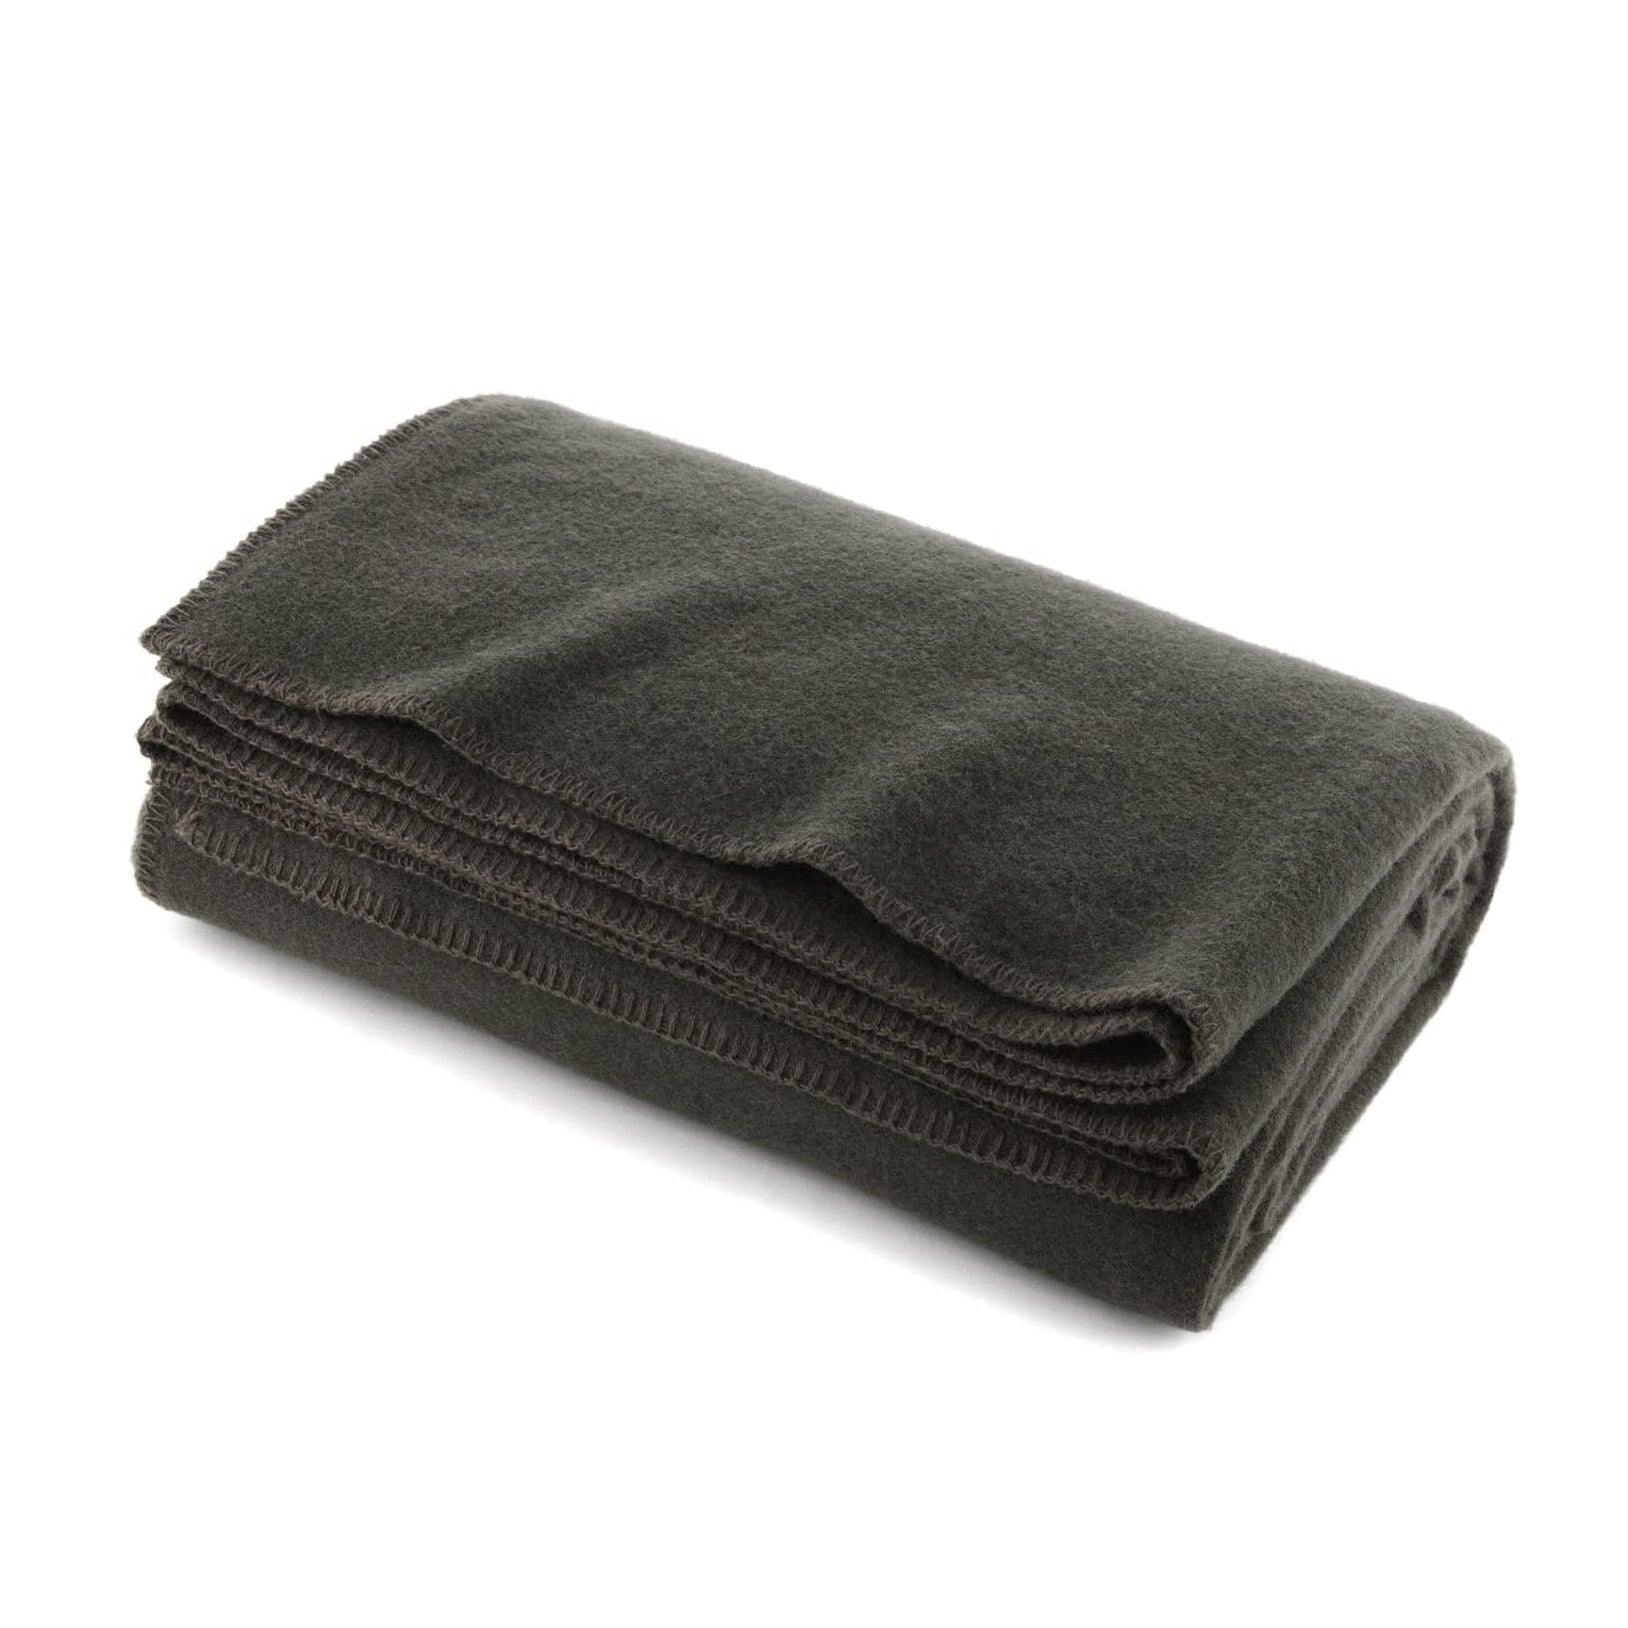 First Aid Only 21-610 Wool Fire Blanket